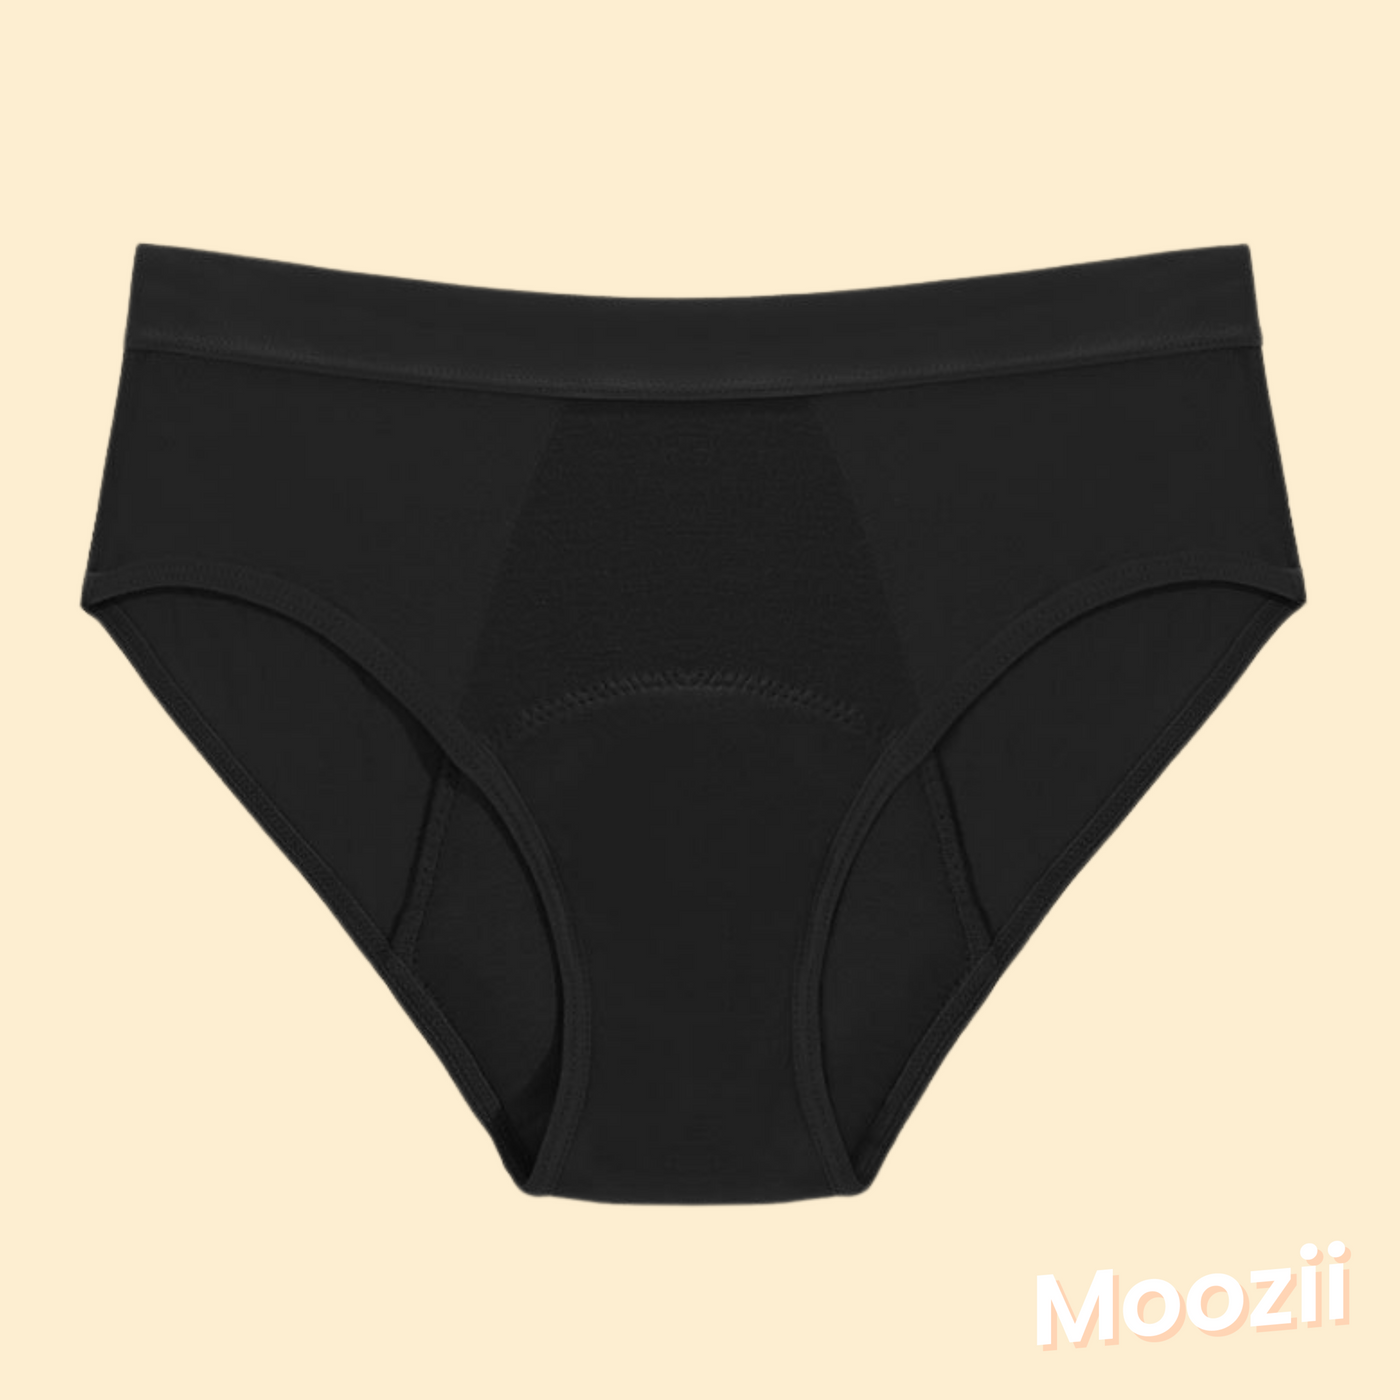 MOOZII MID RISE REUSABLE PERIOD UNDERWEAR – Moozii